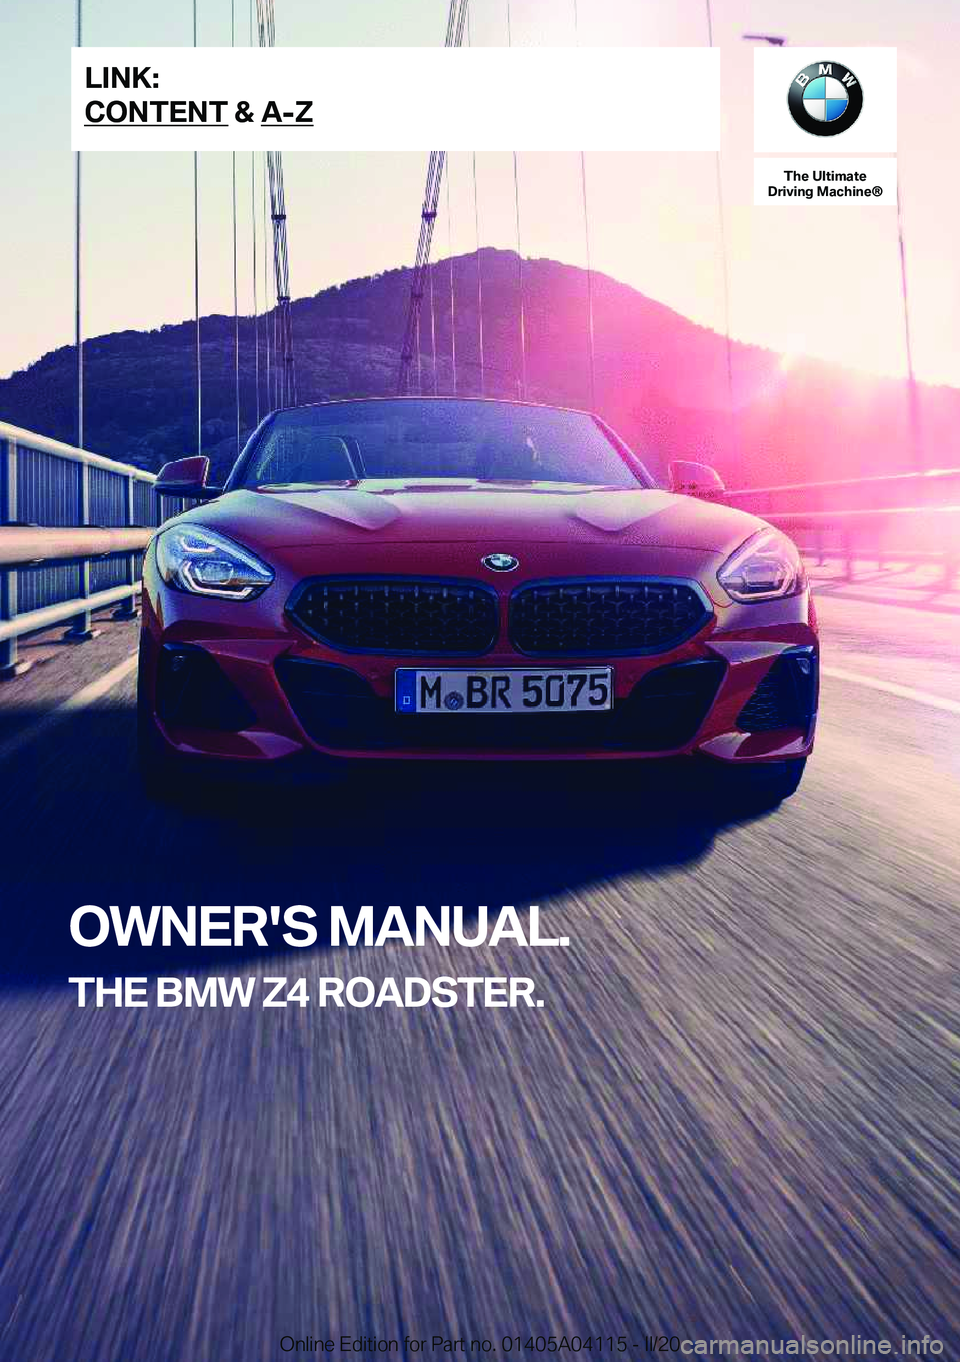 BMW Z4 2020  Owners Manual �T�h�e��U�l�t�i�m�a�t�e
�D�r�i�v�i�n�g��M�a�c�h�i�n�e�n
�O�W�N�E�R�'�S��M�A�N�U�A�L�.
�T�H�E��B�M�W��Z�4��R�O�A�D�S�T�E�R�.�L�I�N�K�:
�C�O�N�T�E�N�T��&��A�-�Z�O�n�l�i�n�e��E�d�i�t�i�o�n�